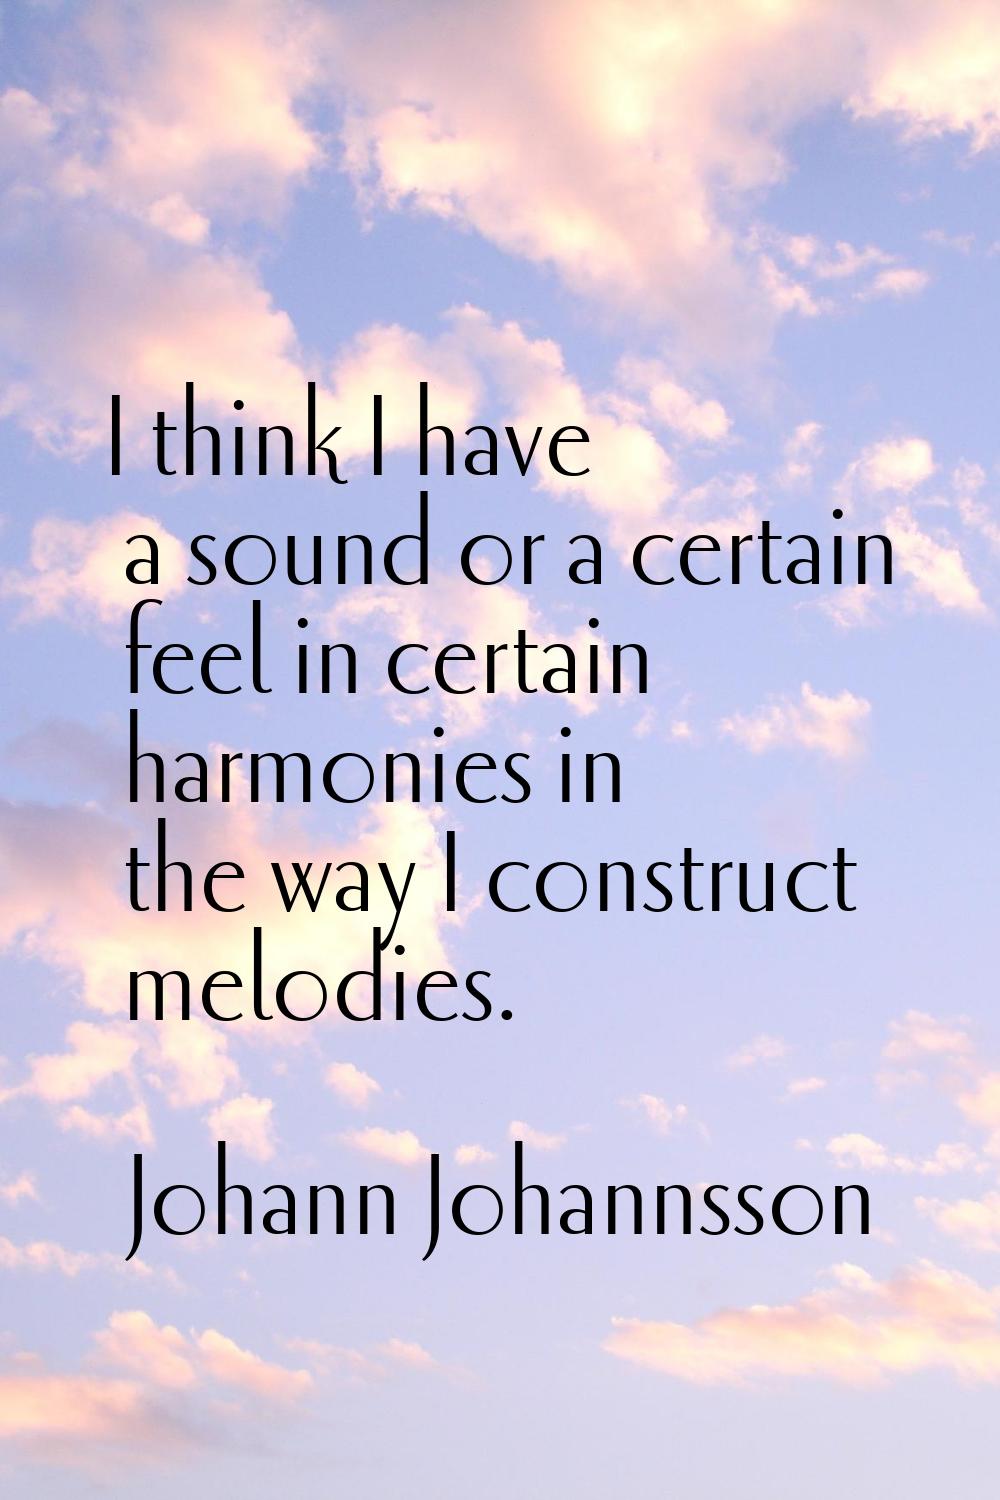 I think I have a sound or a certain feel in certain harmonies in the way I construct melodies.